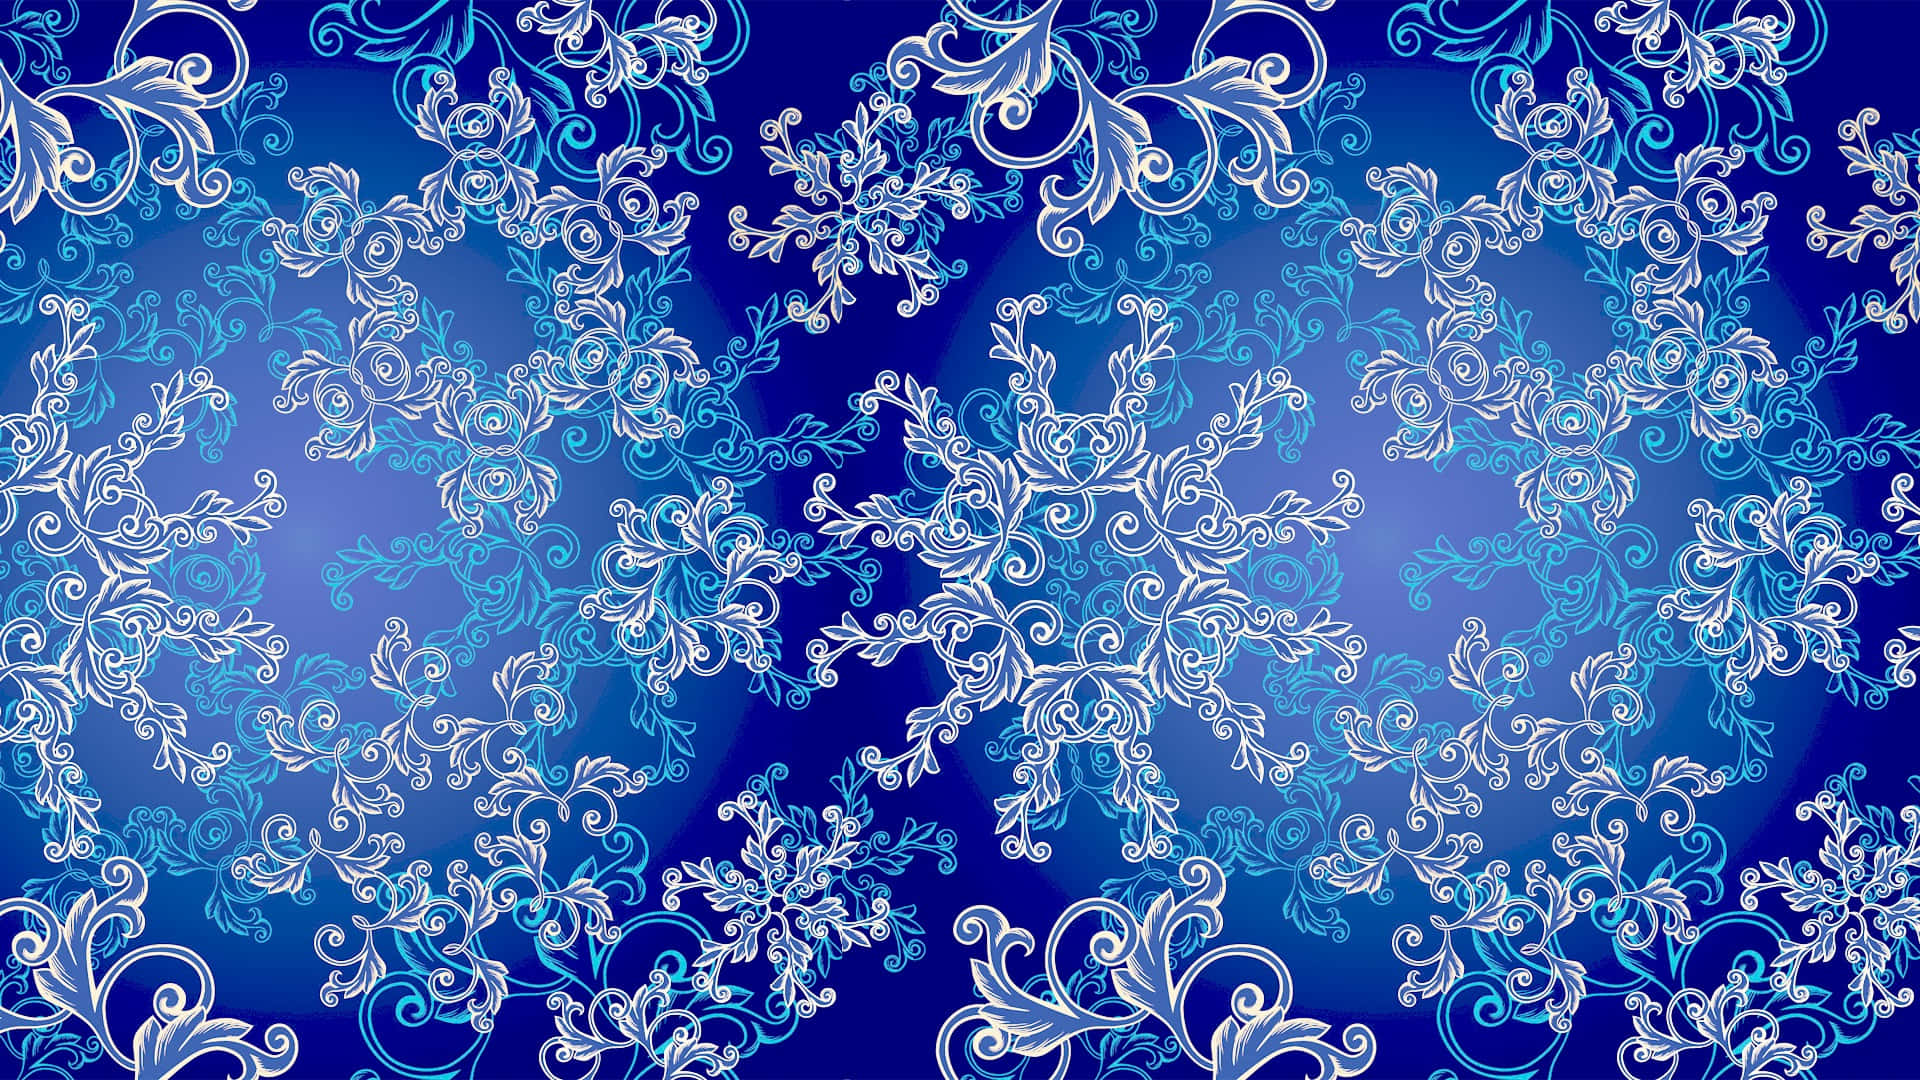 “Let it Snowflake! Enjoy the snow season with this beautiful background image.”